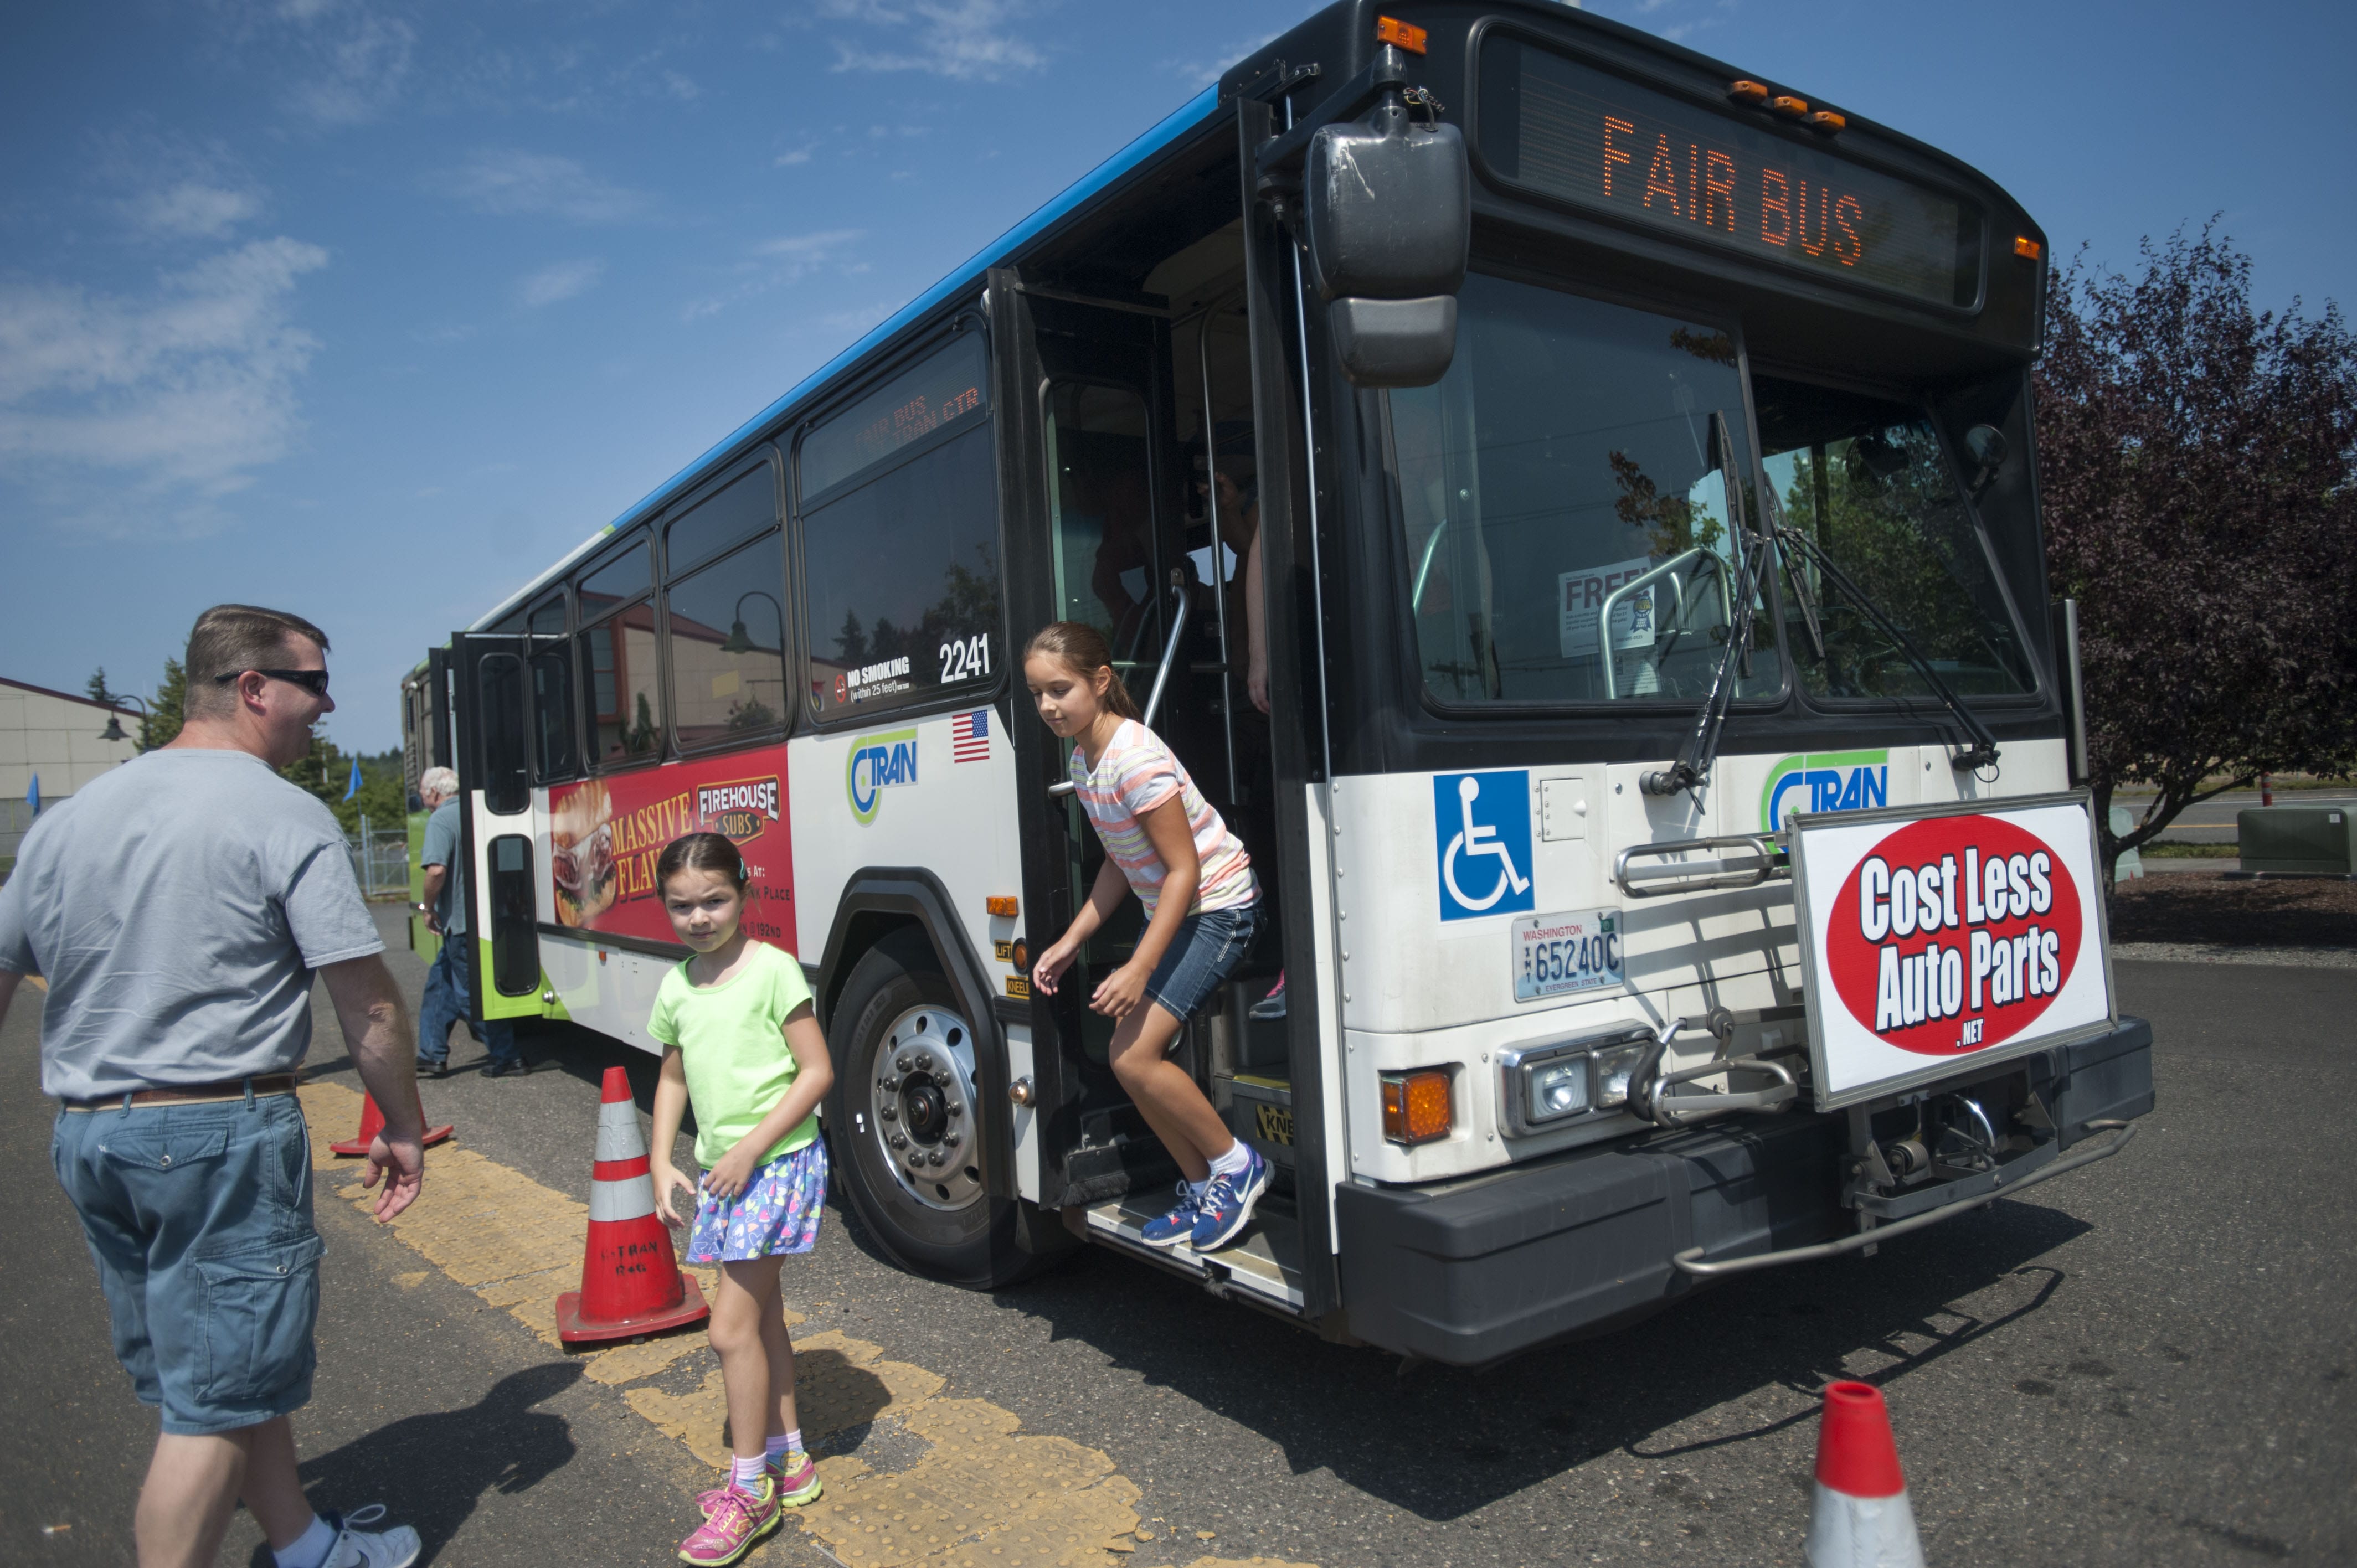 A C-tran bus drops off passengers at the Clark County Fairgrounds in Ridgefield in August 2015. With its new budget, C-Tran plans to expand services and make several capital investments during the two year, 2017-2018 cycle without raising taxes or passenger fares.